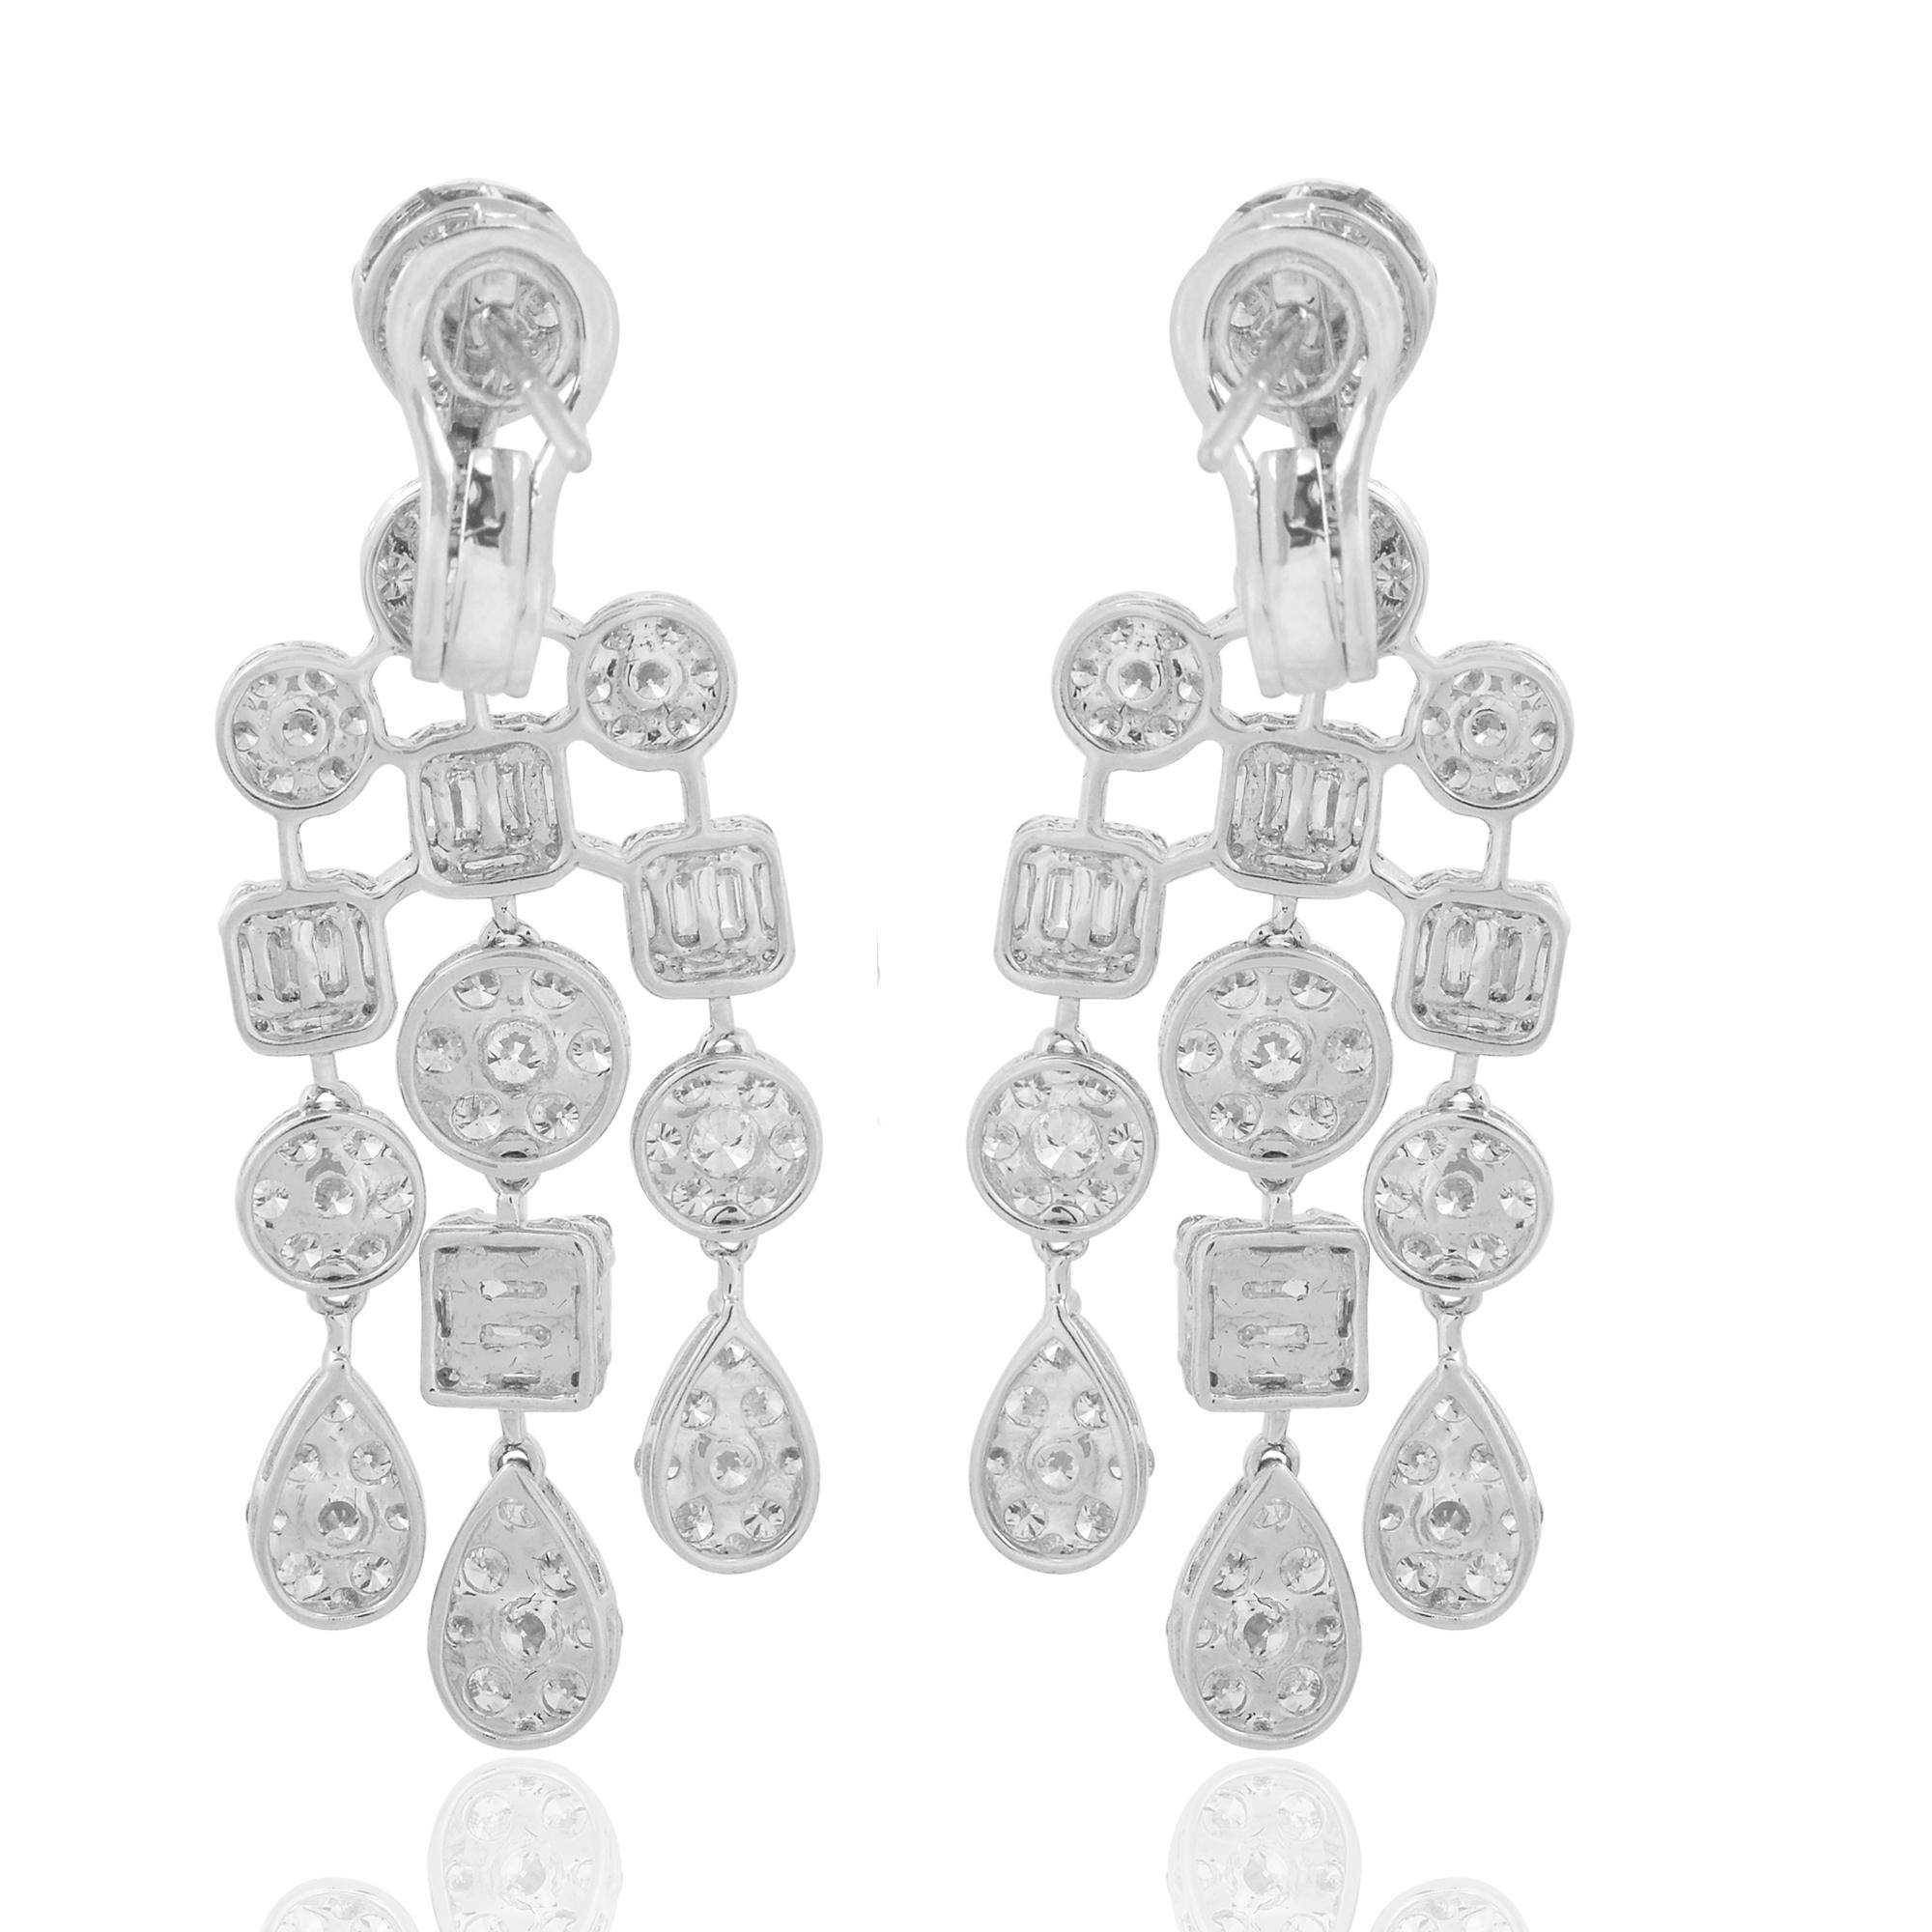 Round Cut 8.6 Ct. SI Clarity HI Color Diamond Pave Chandelier Earrings 18 Karat White Gold For Sale